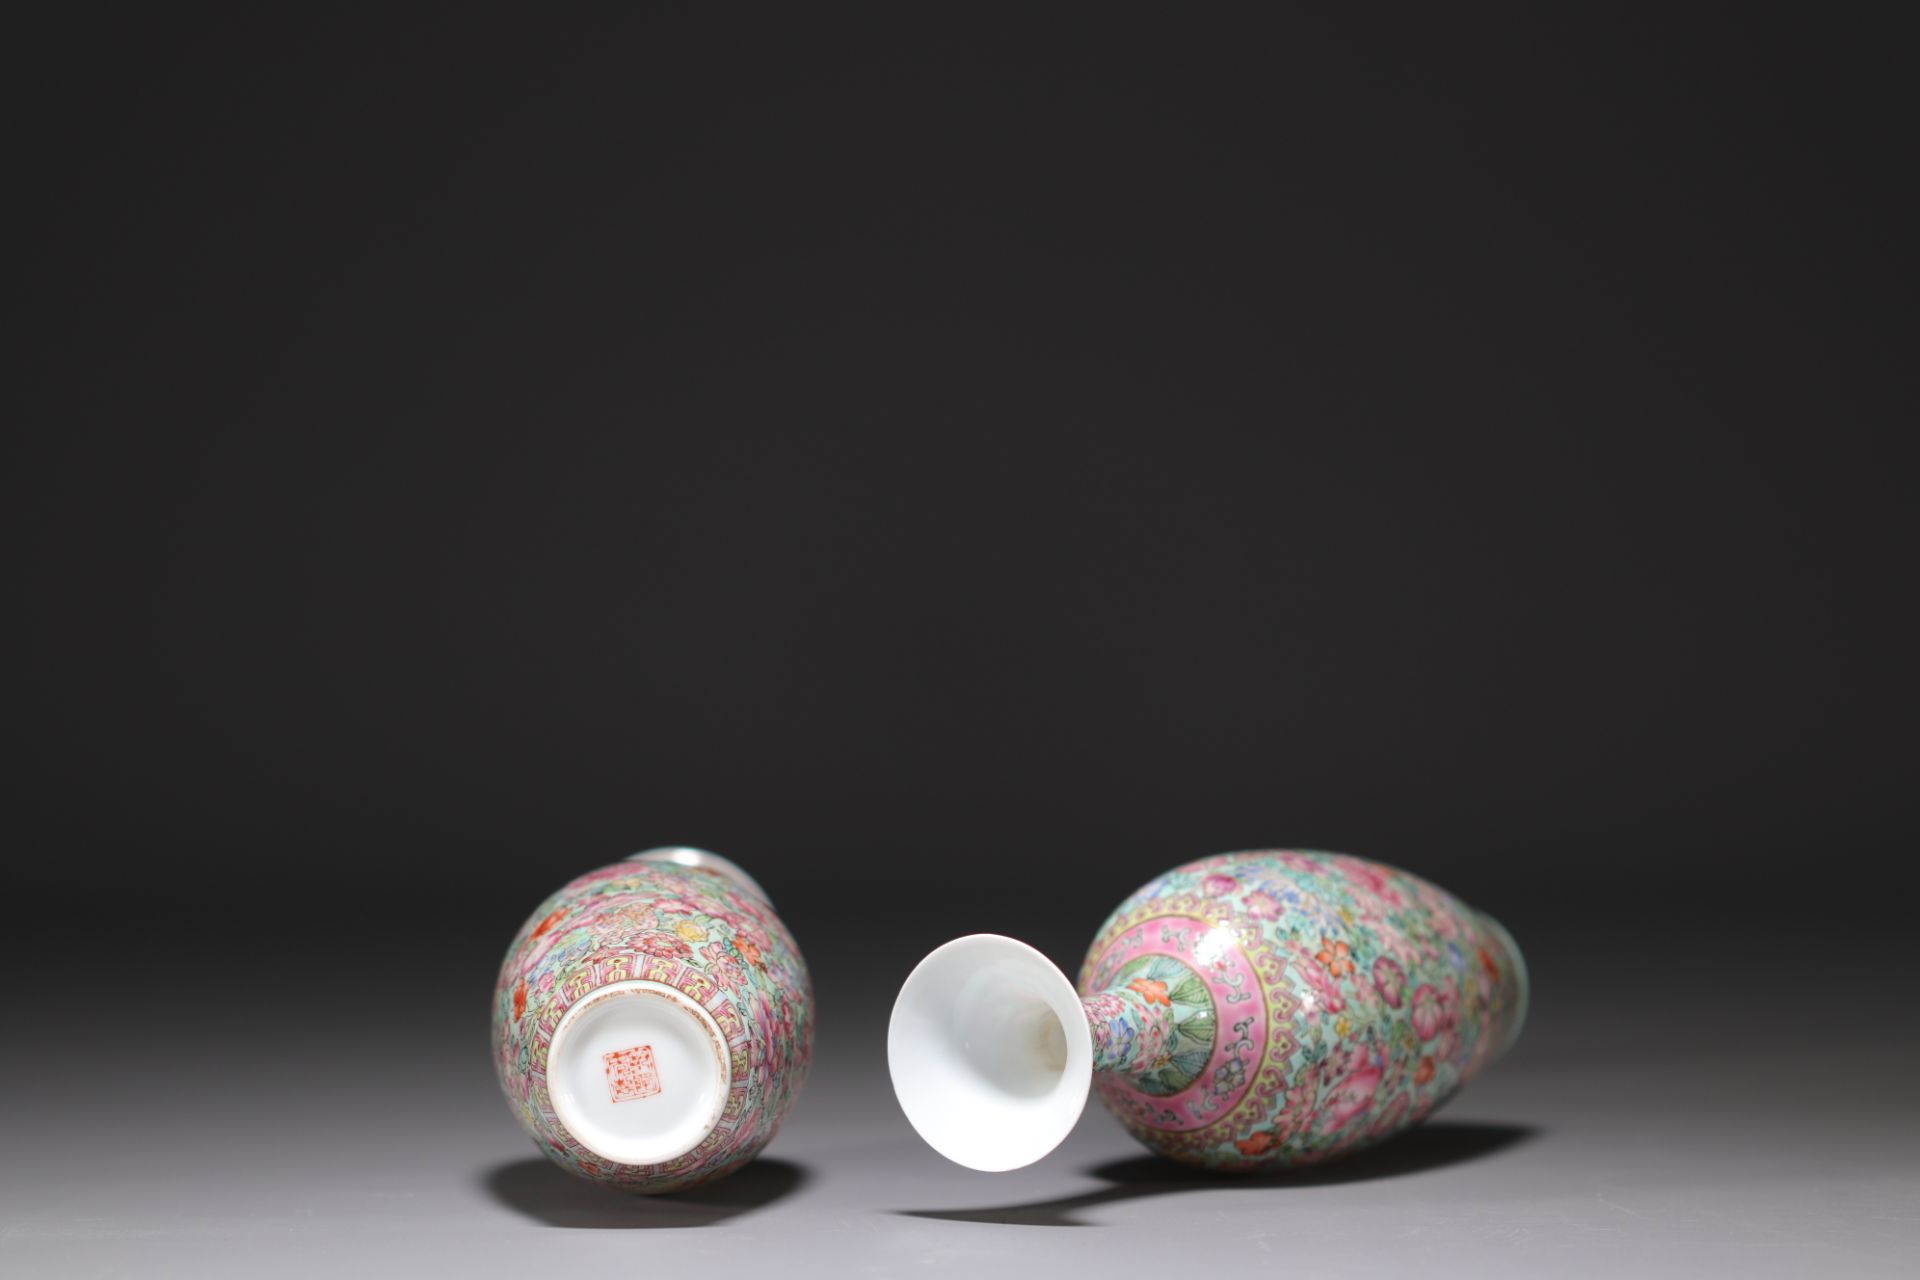 China - A pair of eggshell porcelain vases with floral decoration. - Image 5 of 5